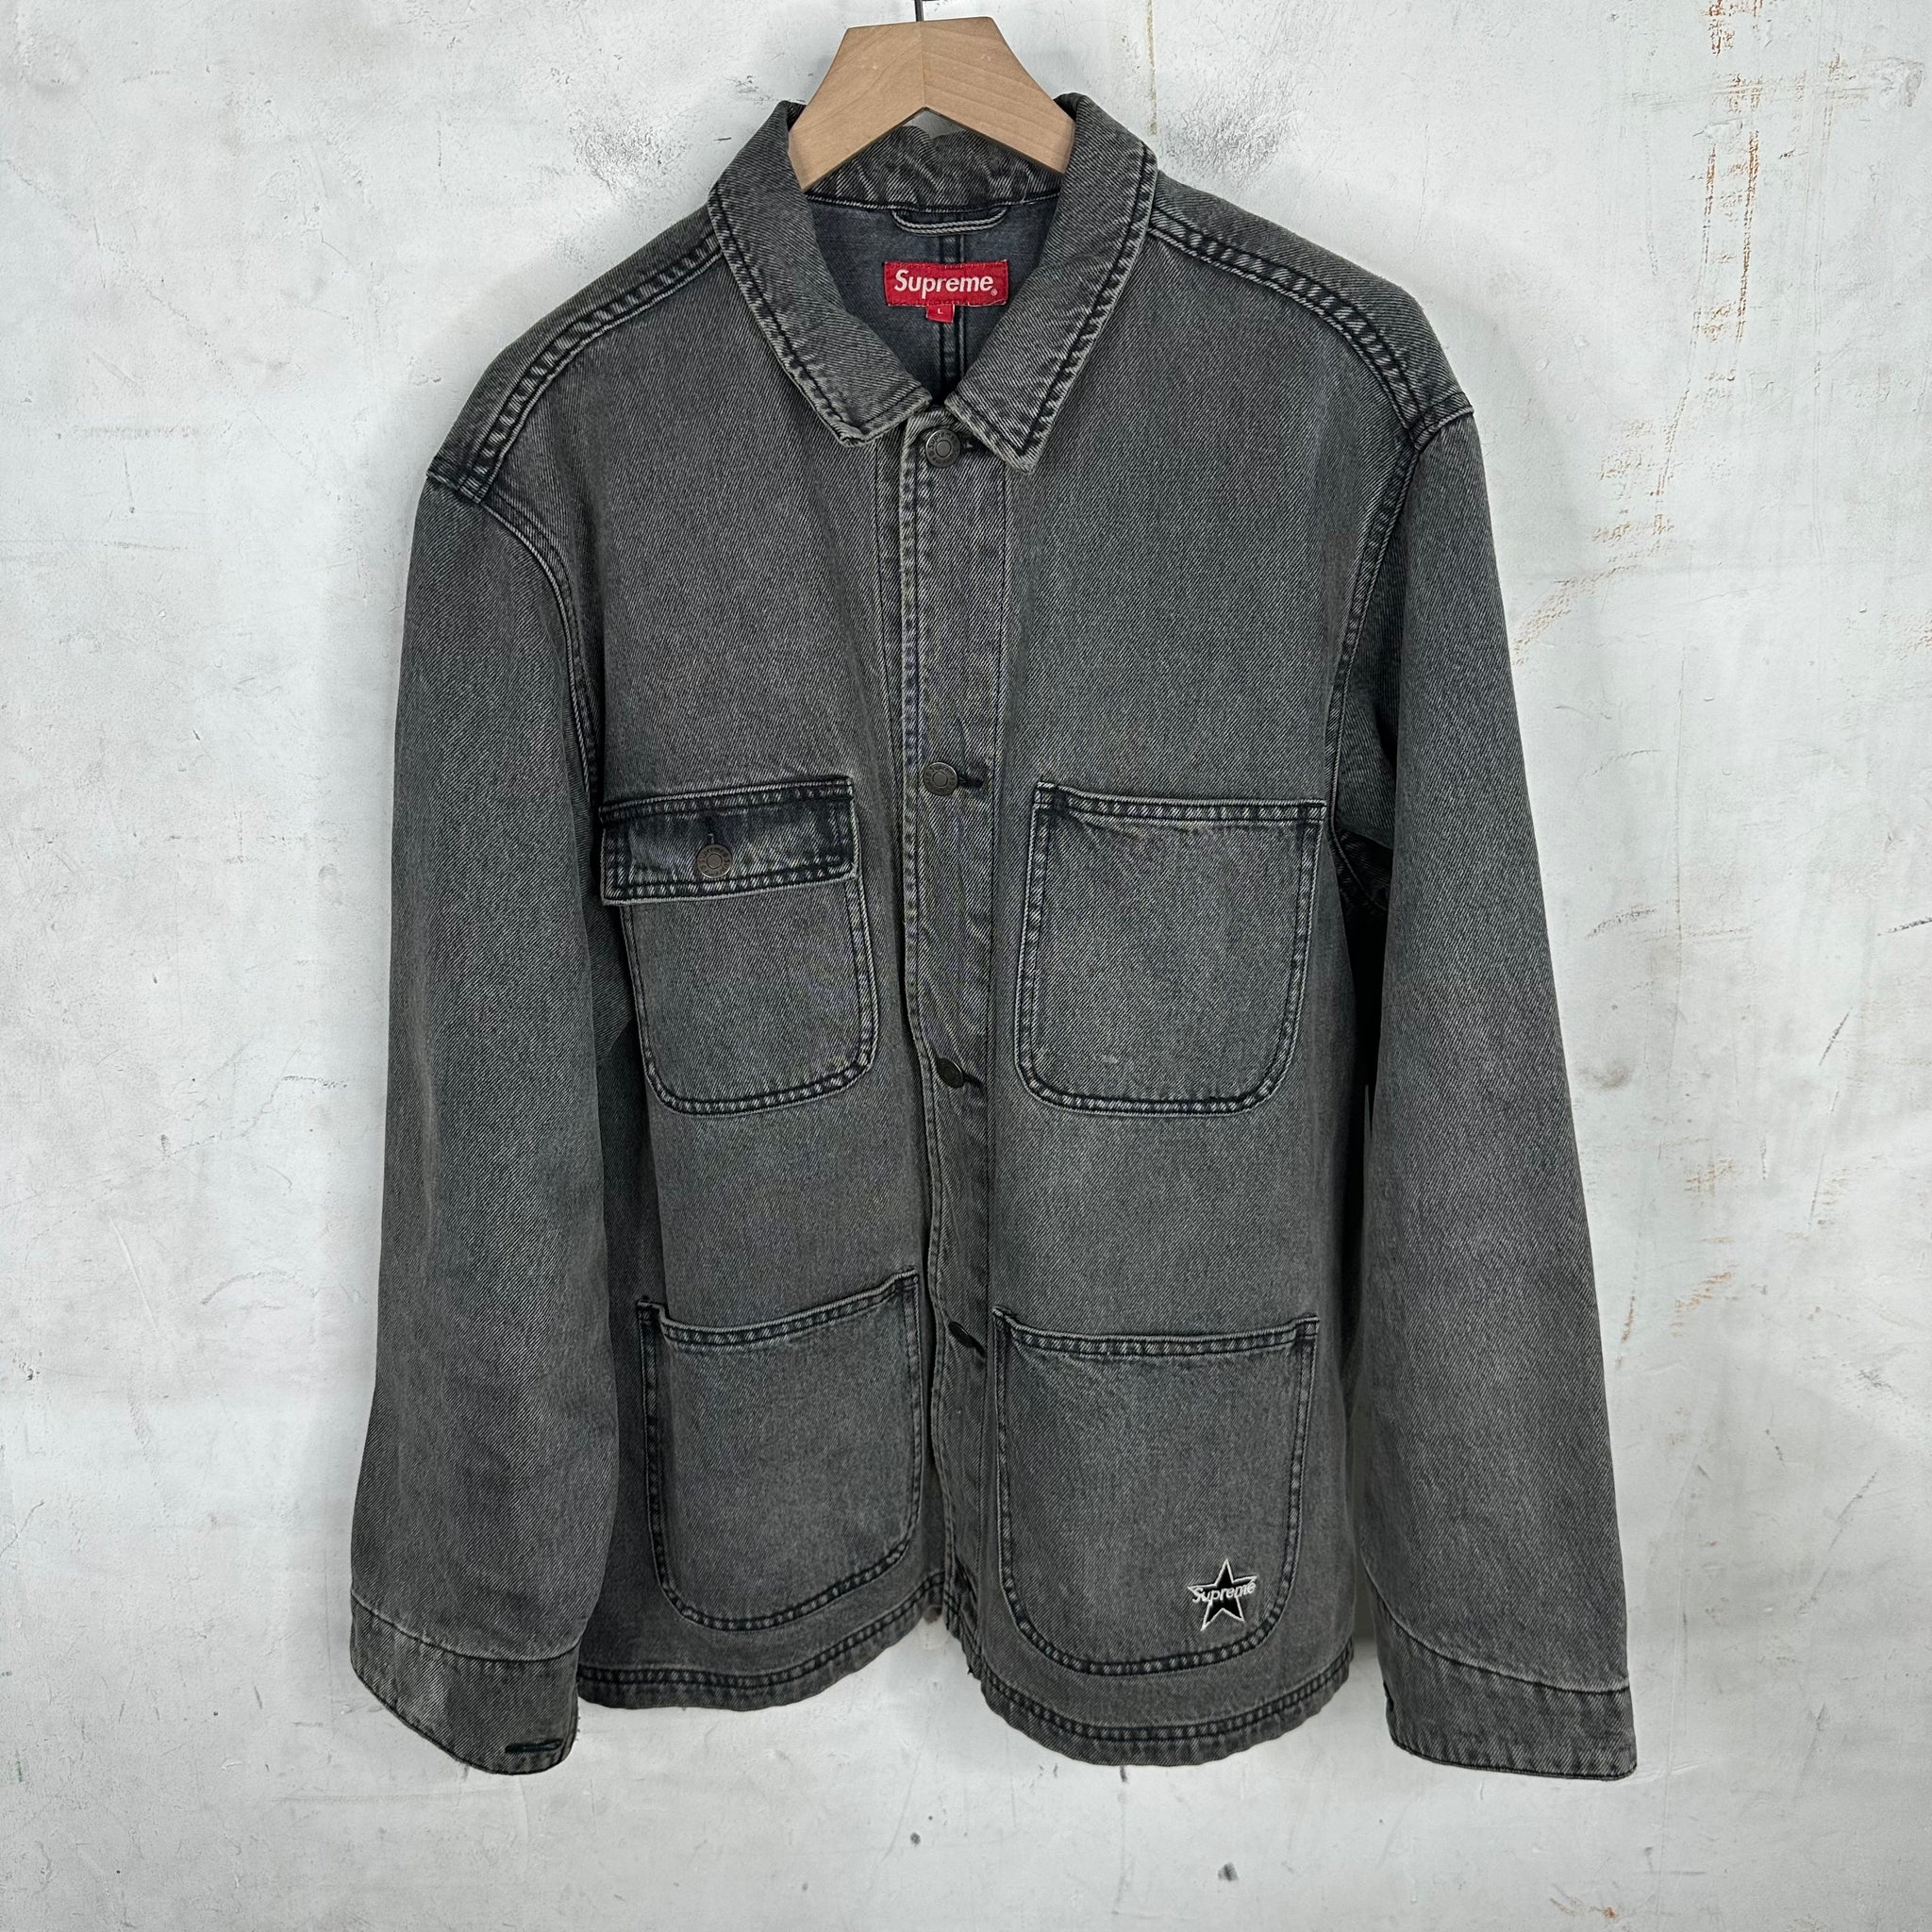 Supreme Faded Pocketed Chore Jacket